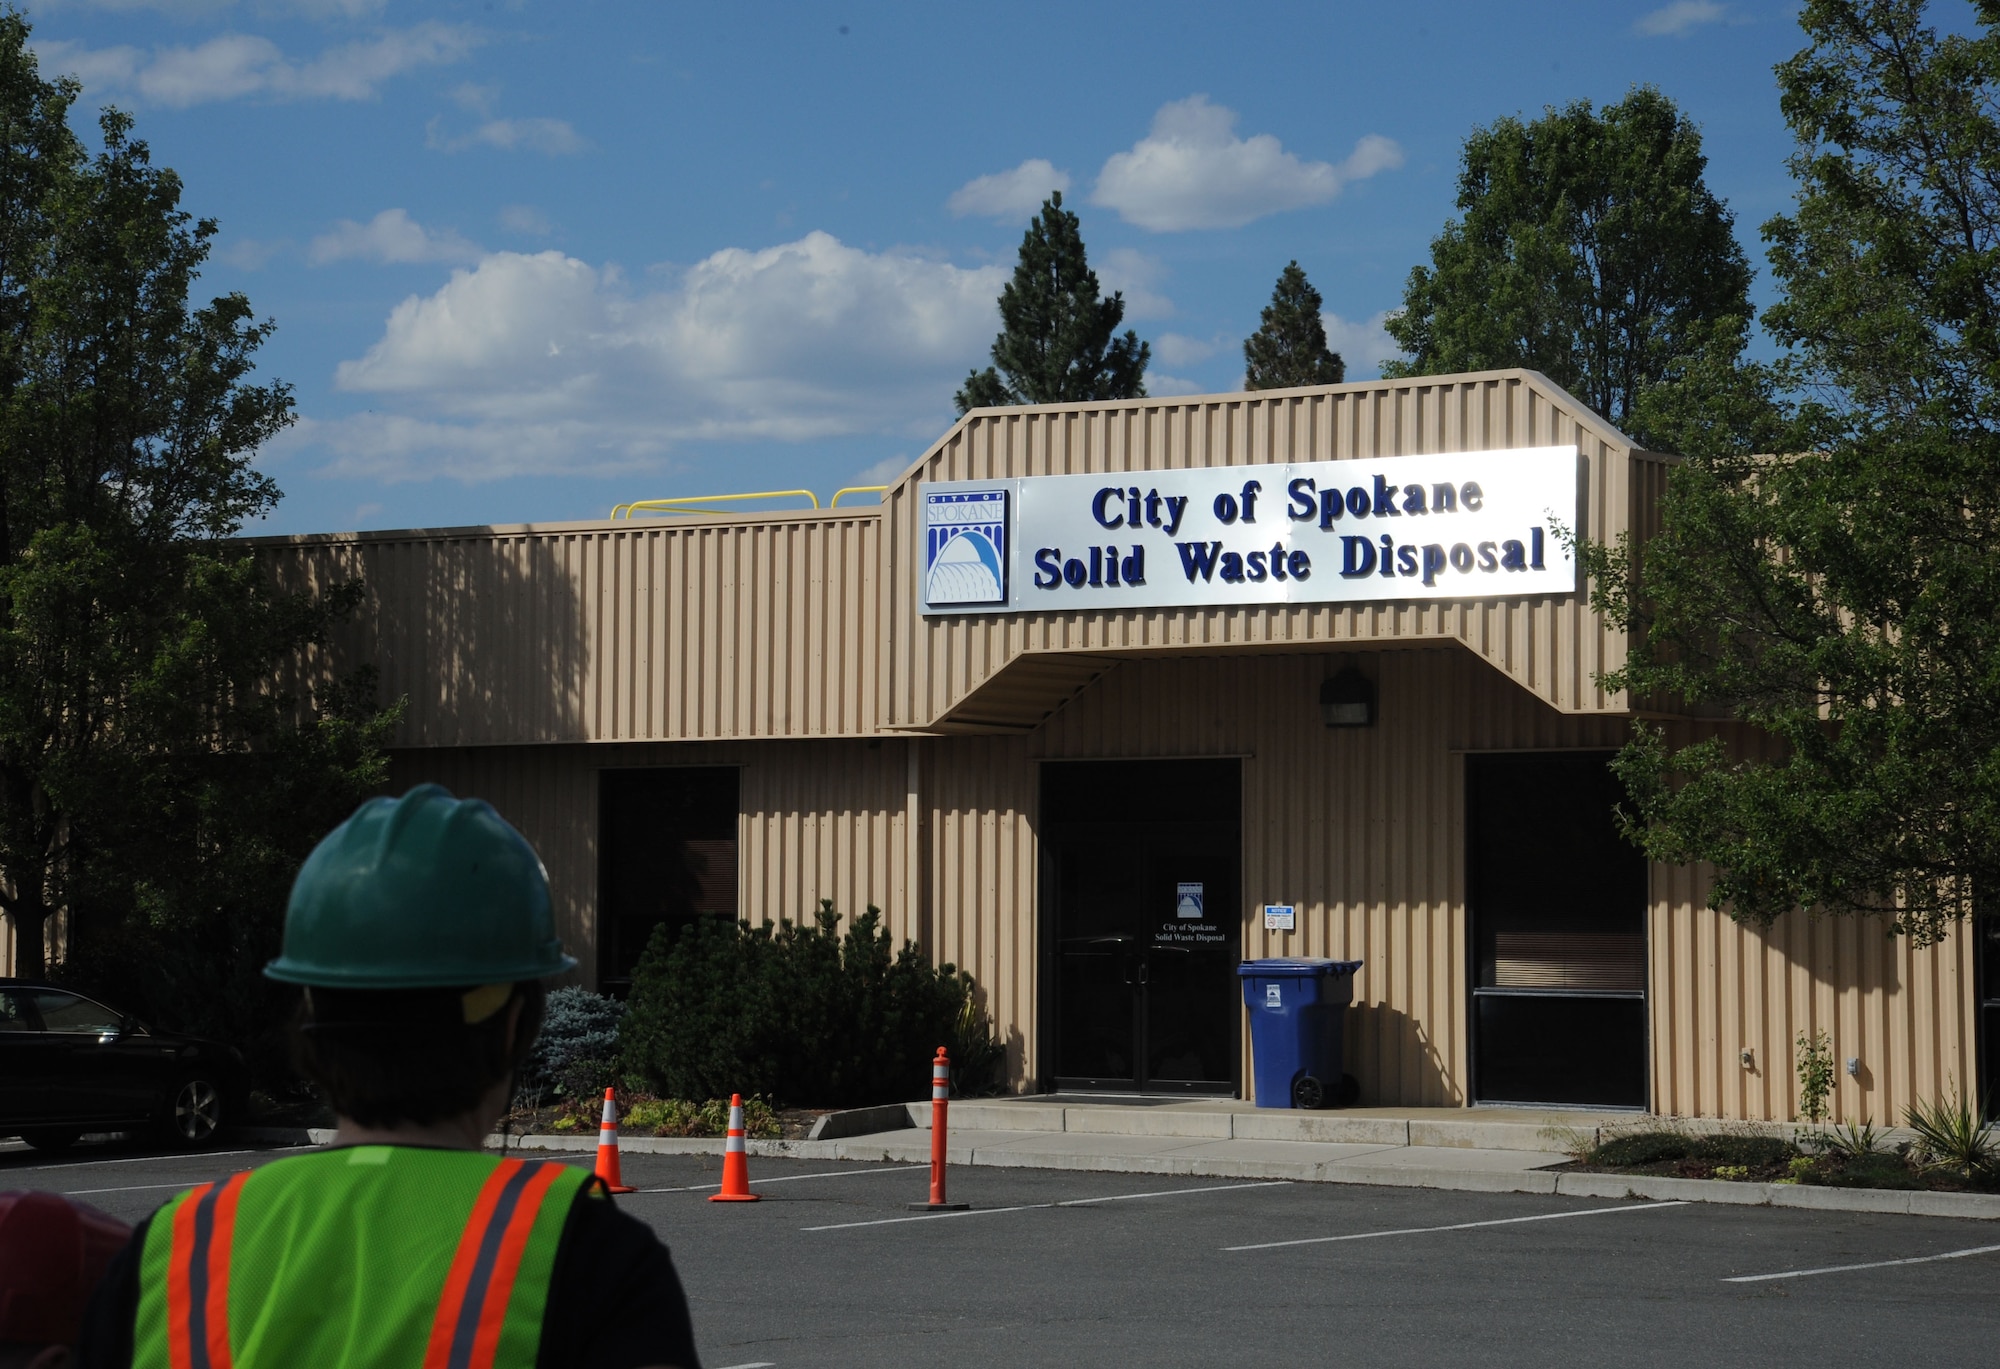 The administration building of the City of Spokane’s Solid Waste Disposal agency sits across the parking lot from the Waste to Energy Facility near Spokane, Wash., June 16, 2015. Different municipalities across the eastern Washington region, including Fairchild Air Force Base, send some of their waste to the plant where it is converted into enough energy to power 13,000 homes a day. (U.S. Air Force photo/Senior Airman Sam Fogleman)